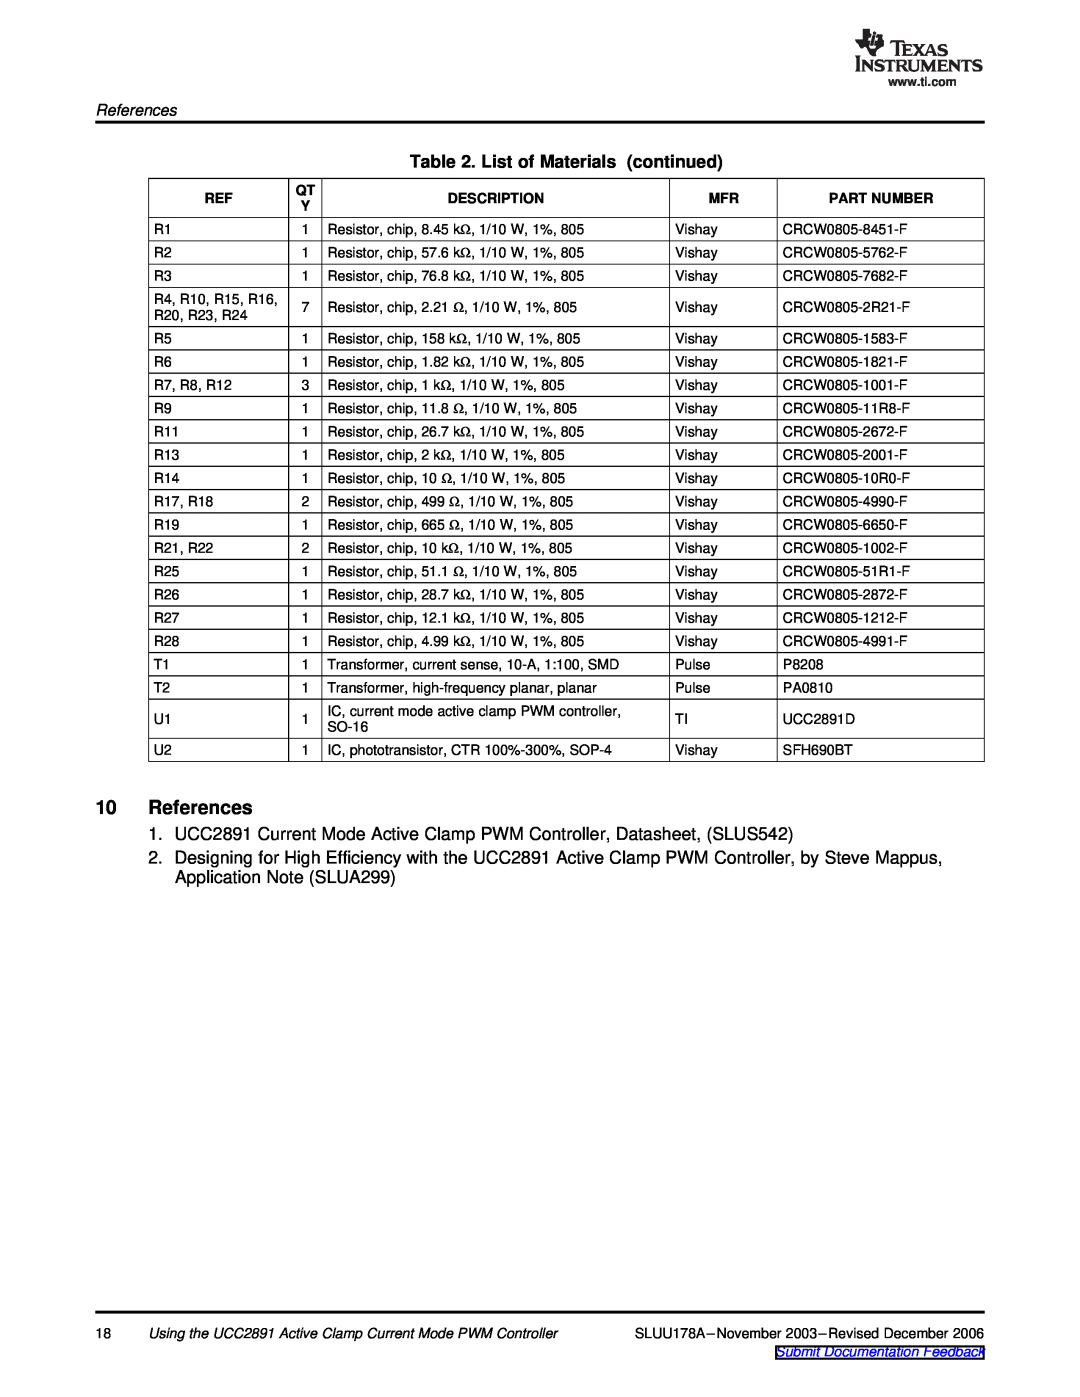 Texas Instruments UCC2891 manual References, List of Materials continued 